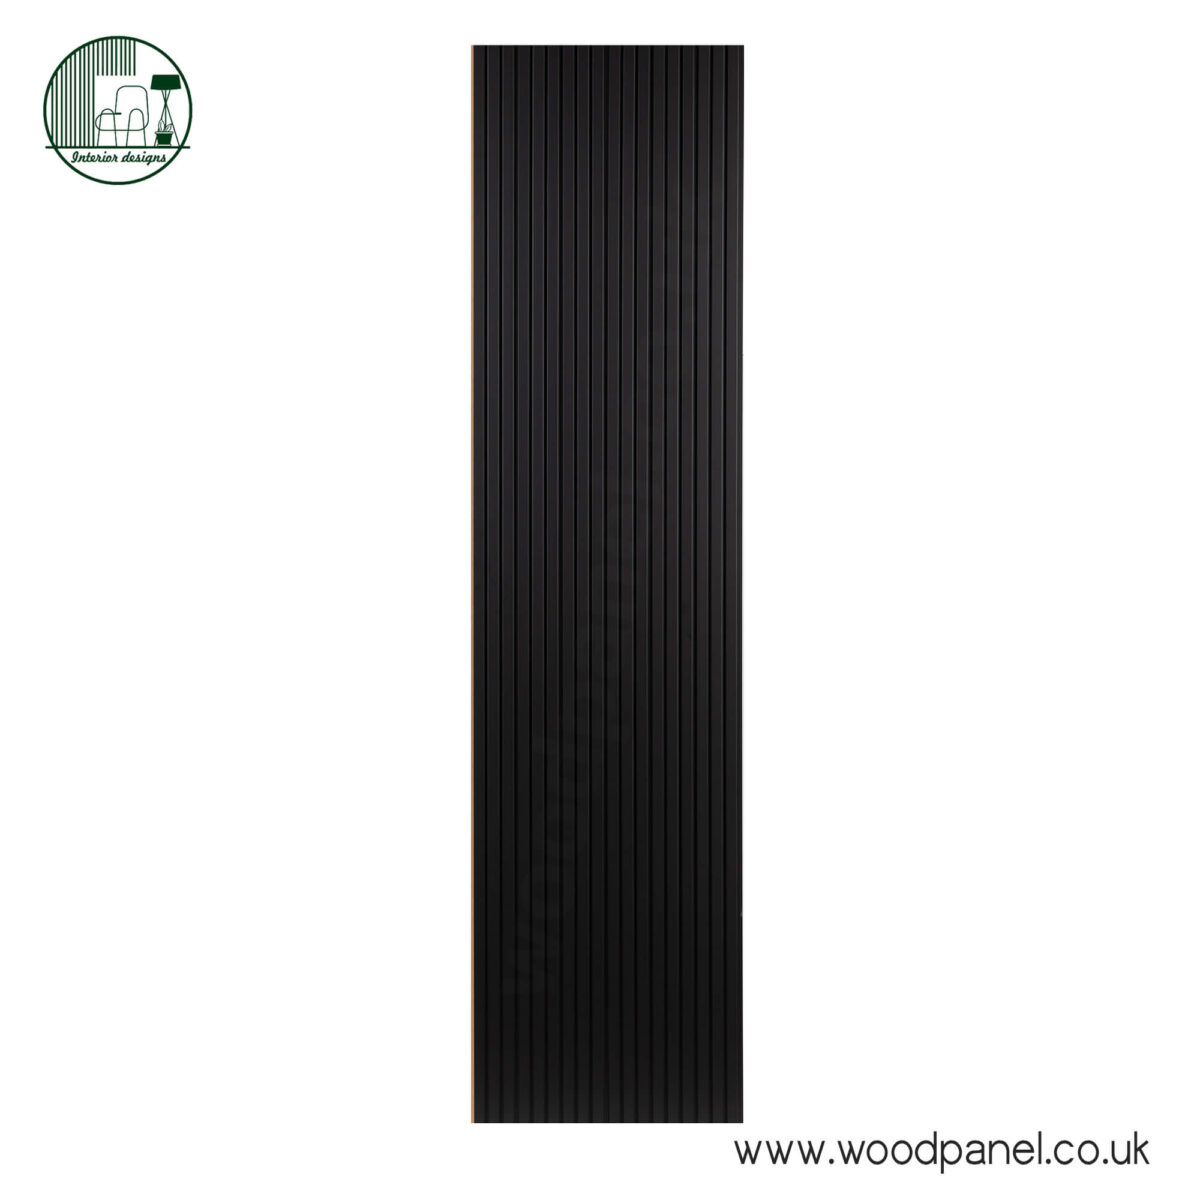 Magnum Opus Wood panel COLLECTION U899 SOFT TOUCH BLACK ST125 1 1 Magnum Opus Wood panel COLLECTION U899 SOFT TOUCH BLACK, ST125